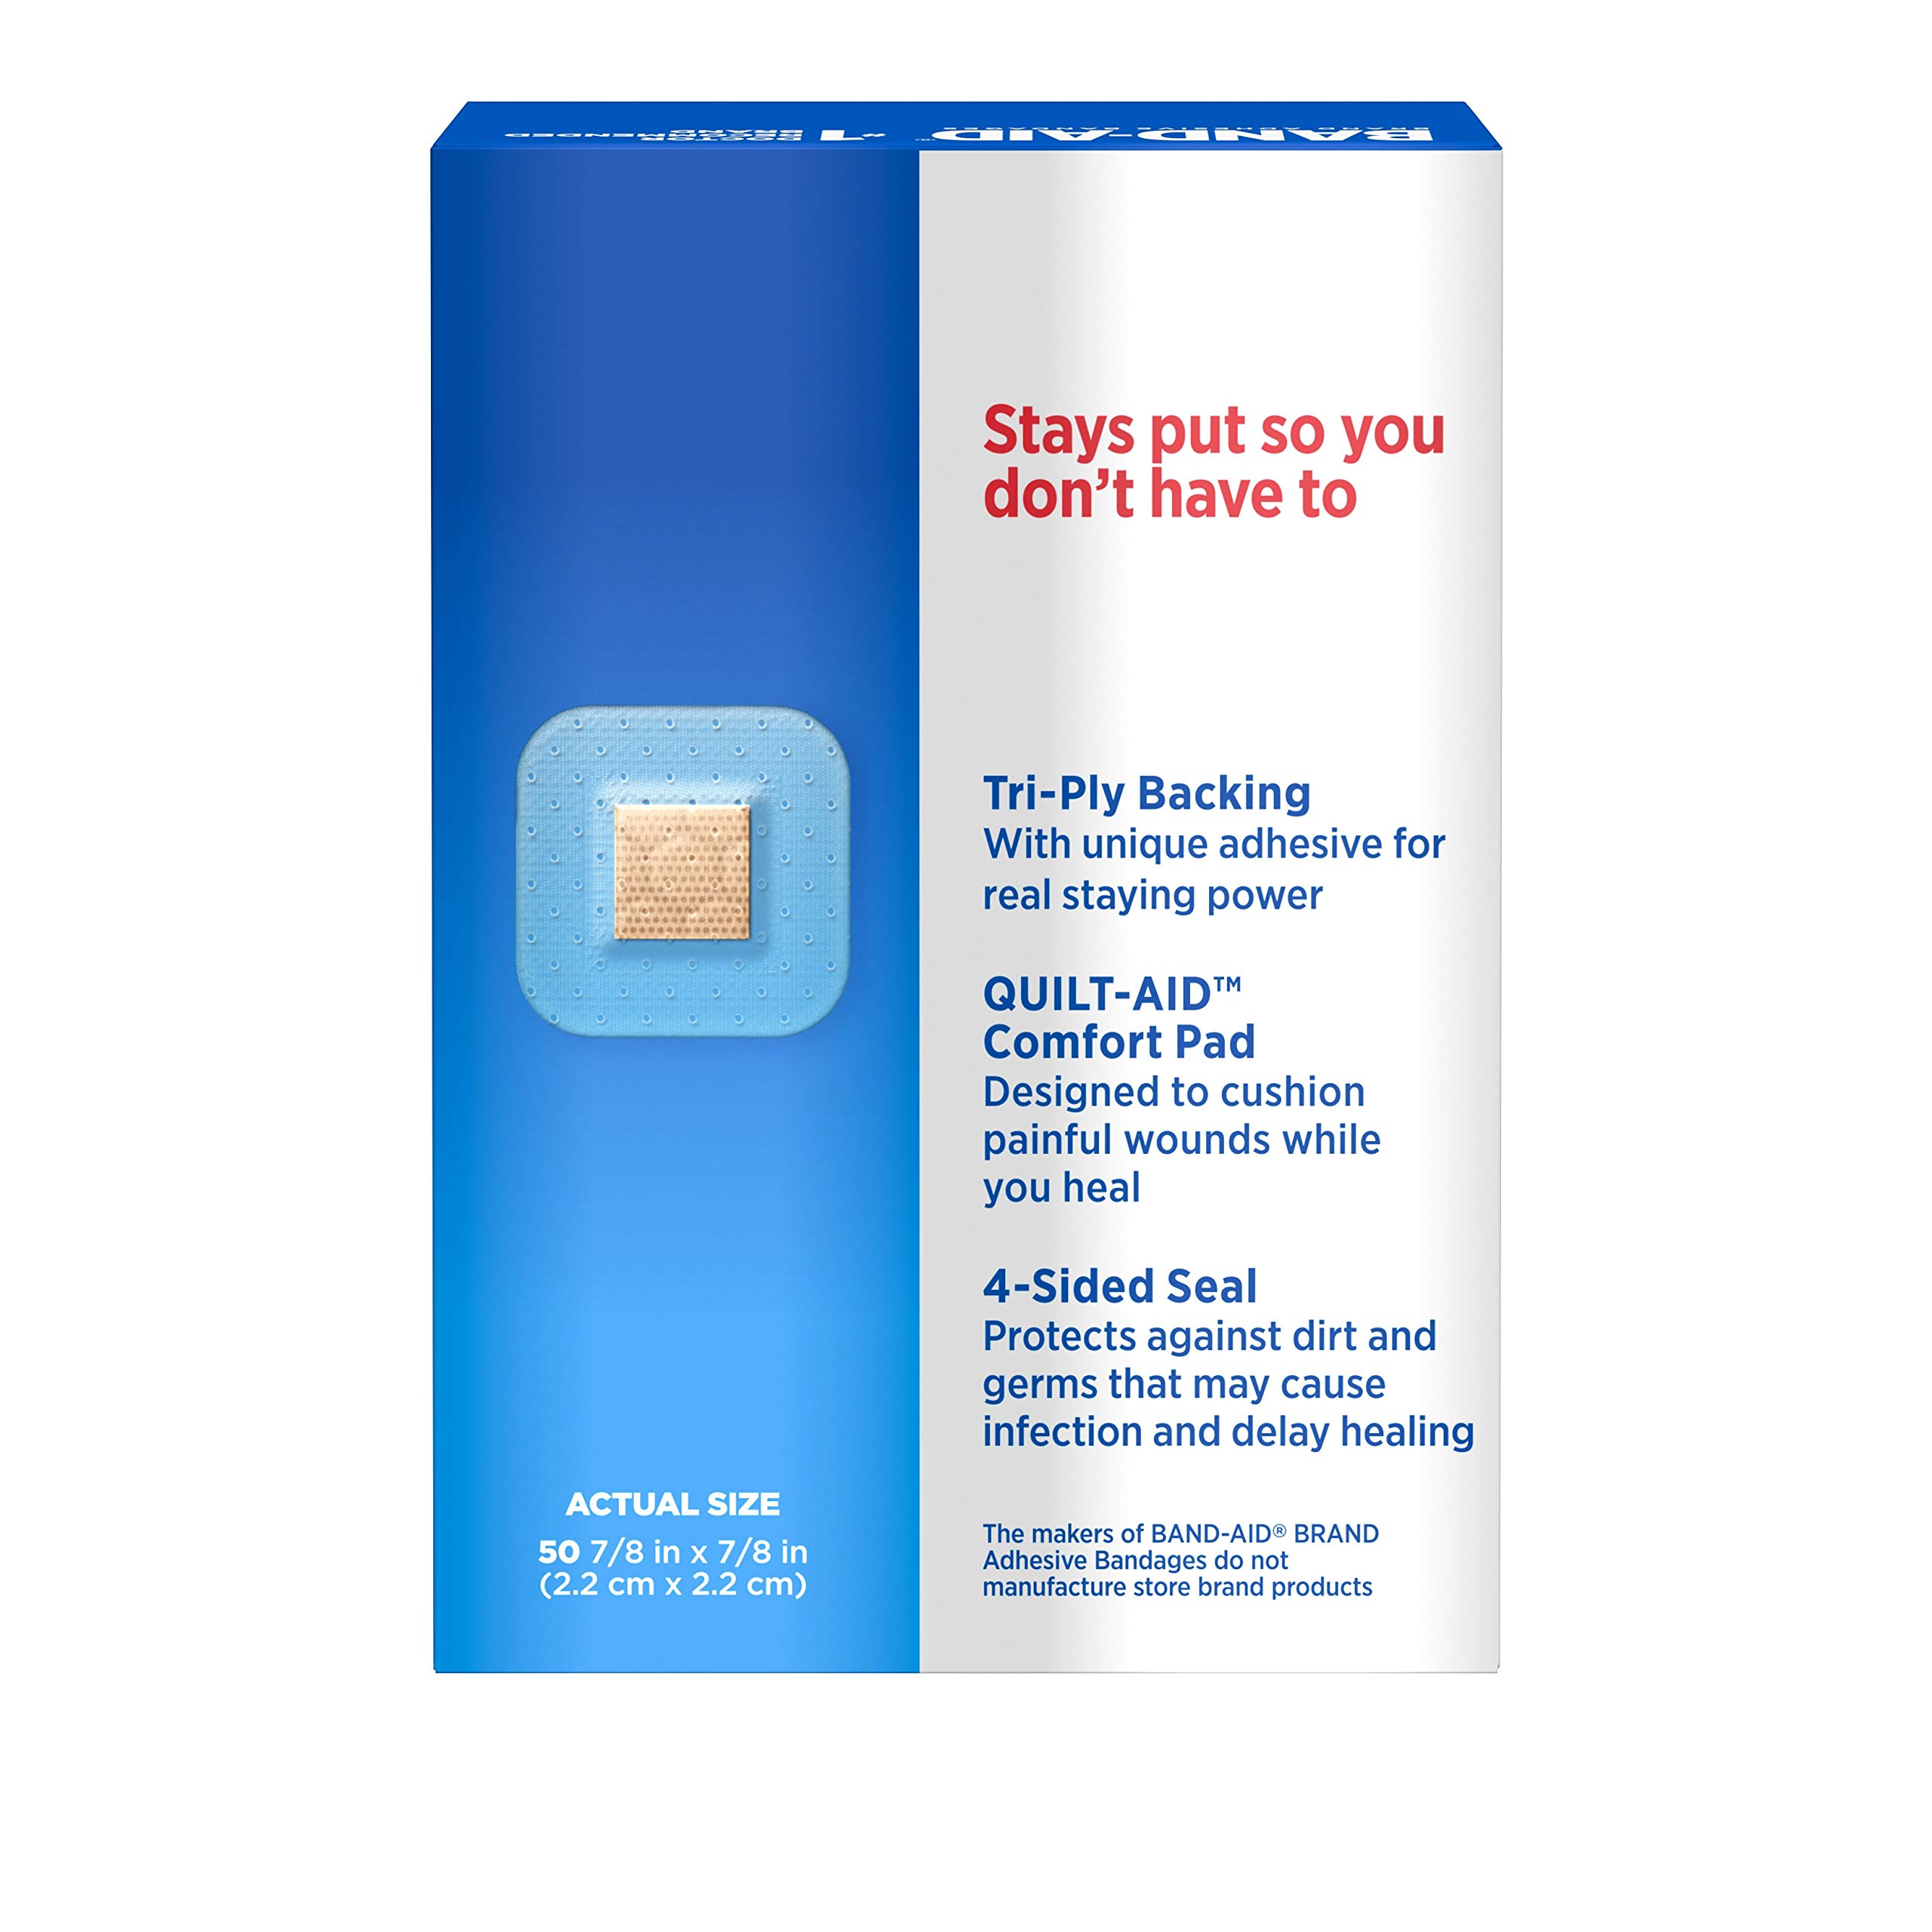 Band-Aid Brand Tru-Stay Clear Spots Bandages for Discreet First Aid, All One Size, 50 Count